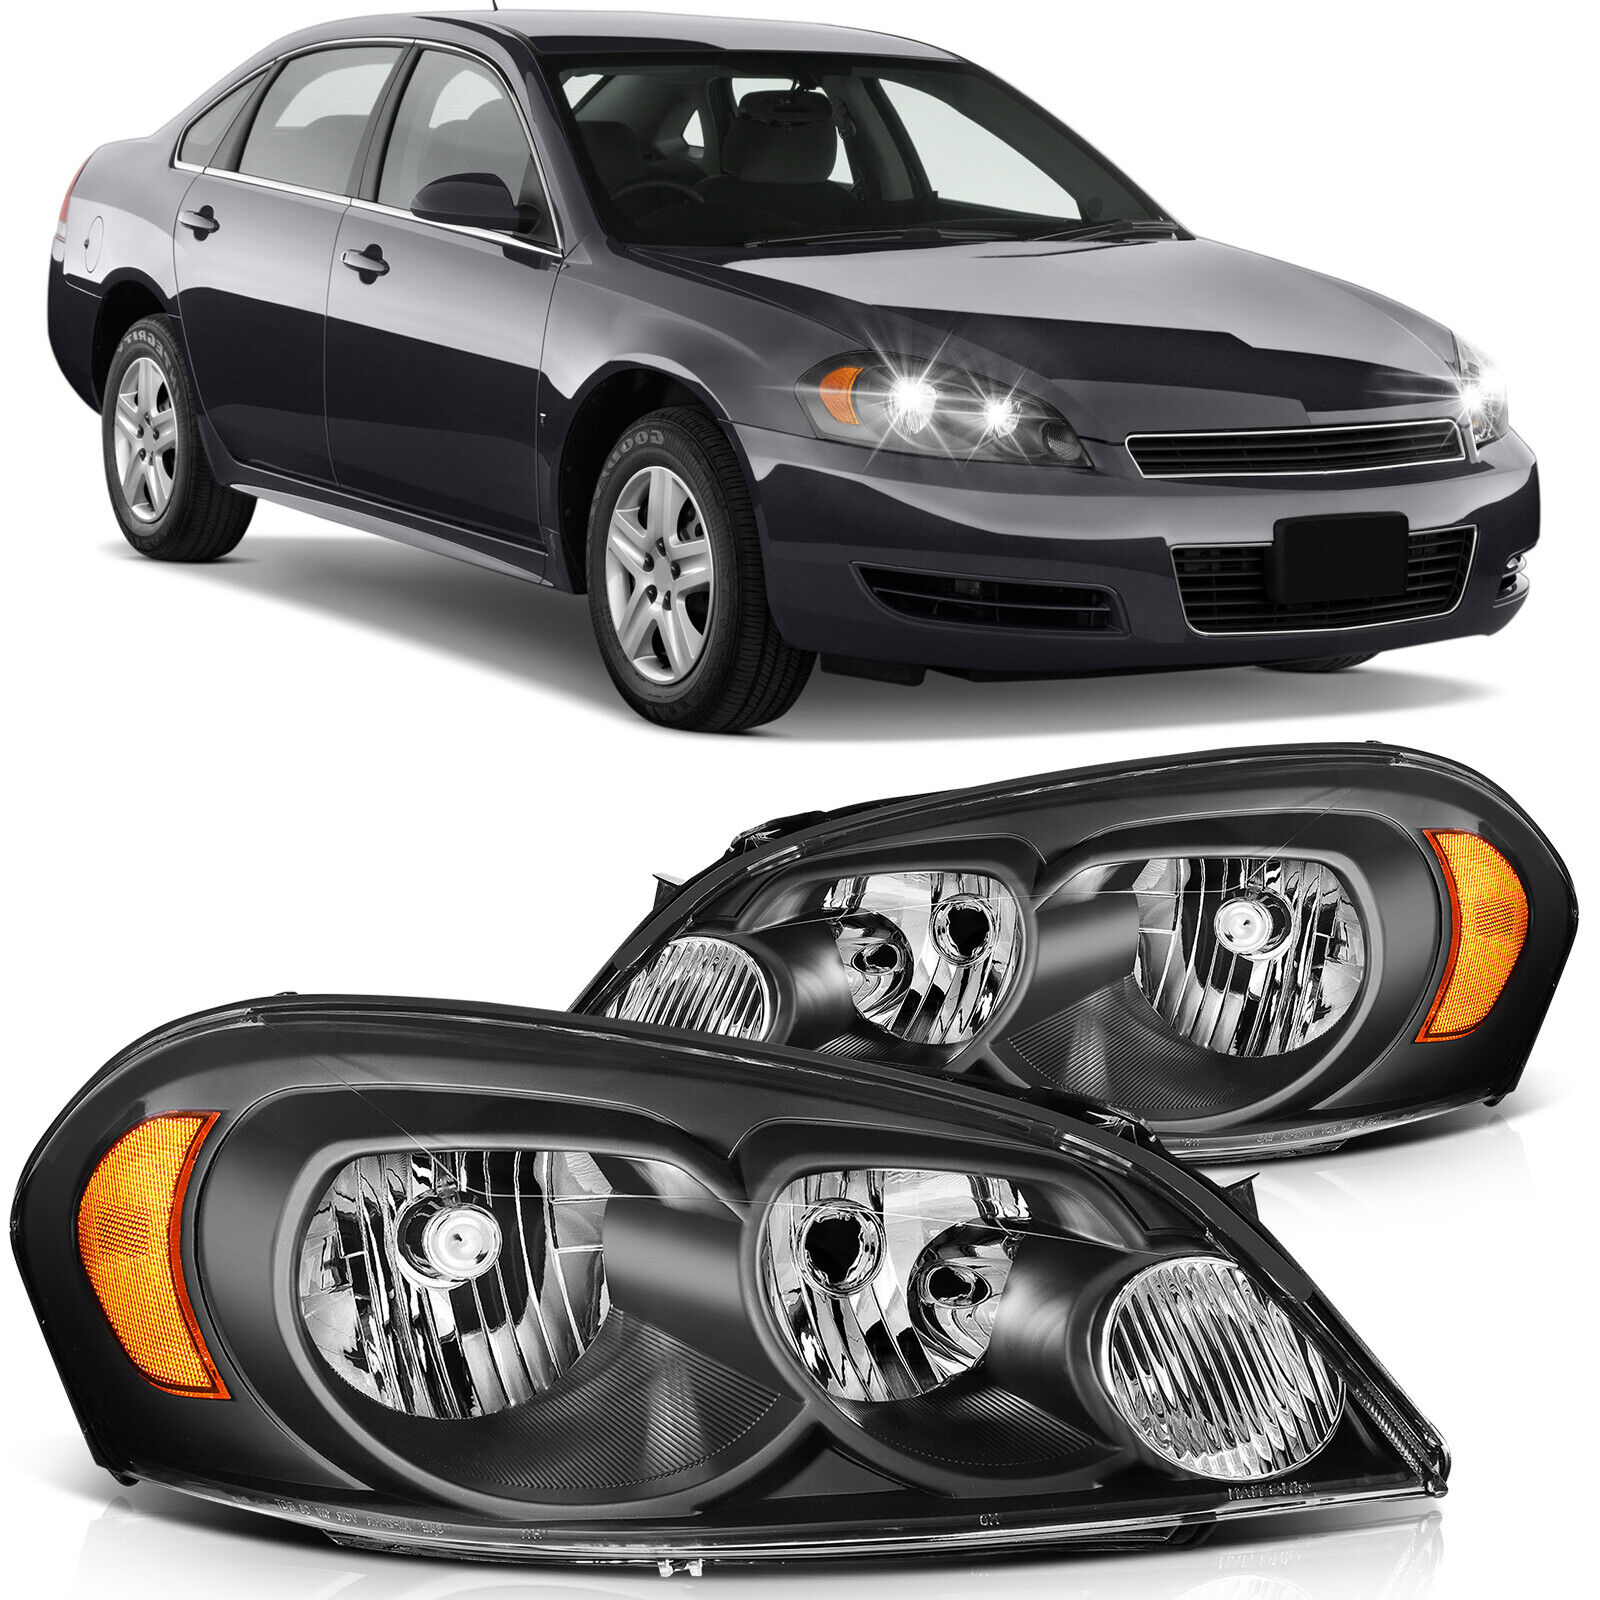 Black Housing For 2006-2013 Chevy Impala/06-07 Monte Carlo Headlights Left+Right